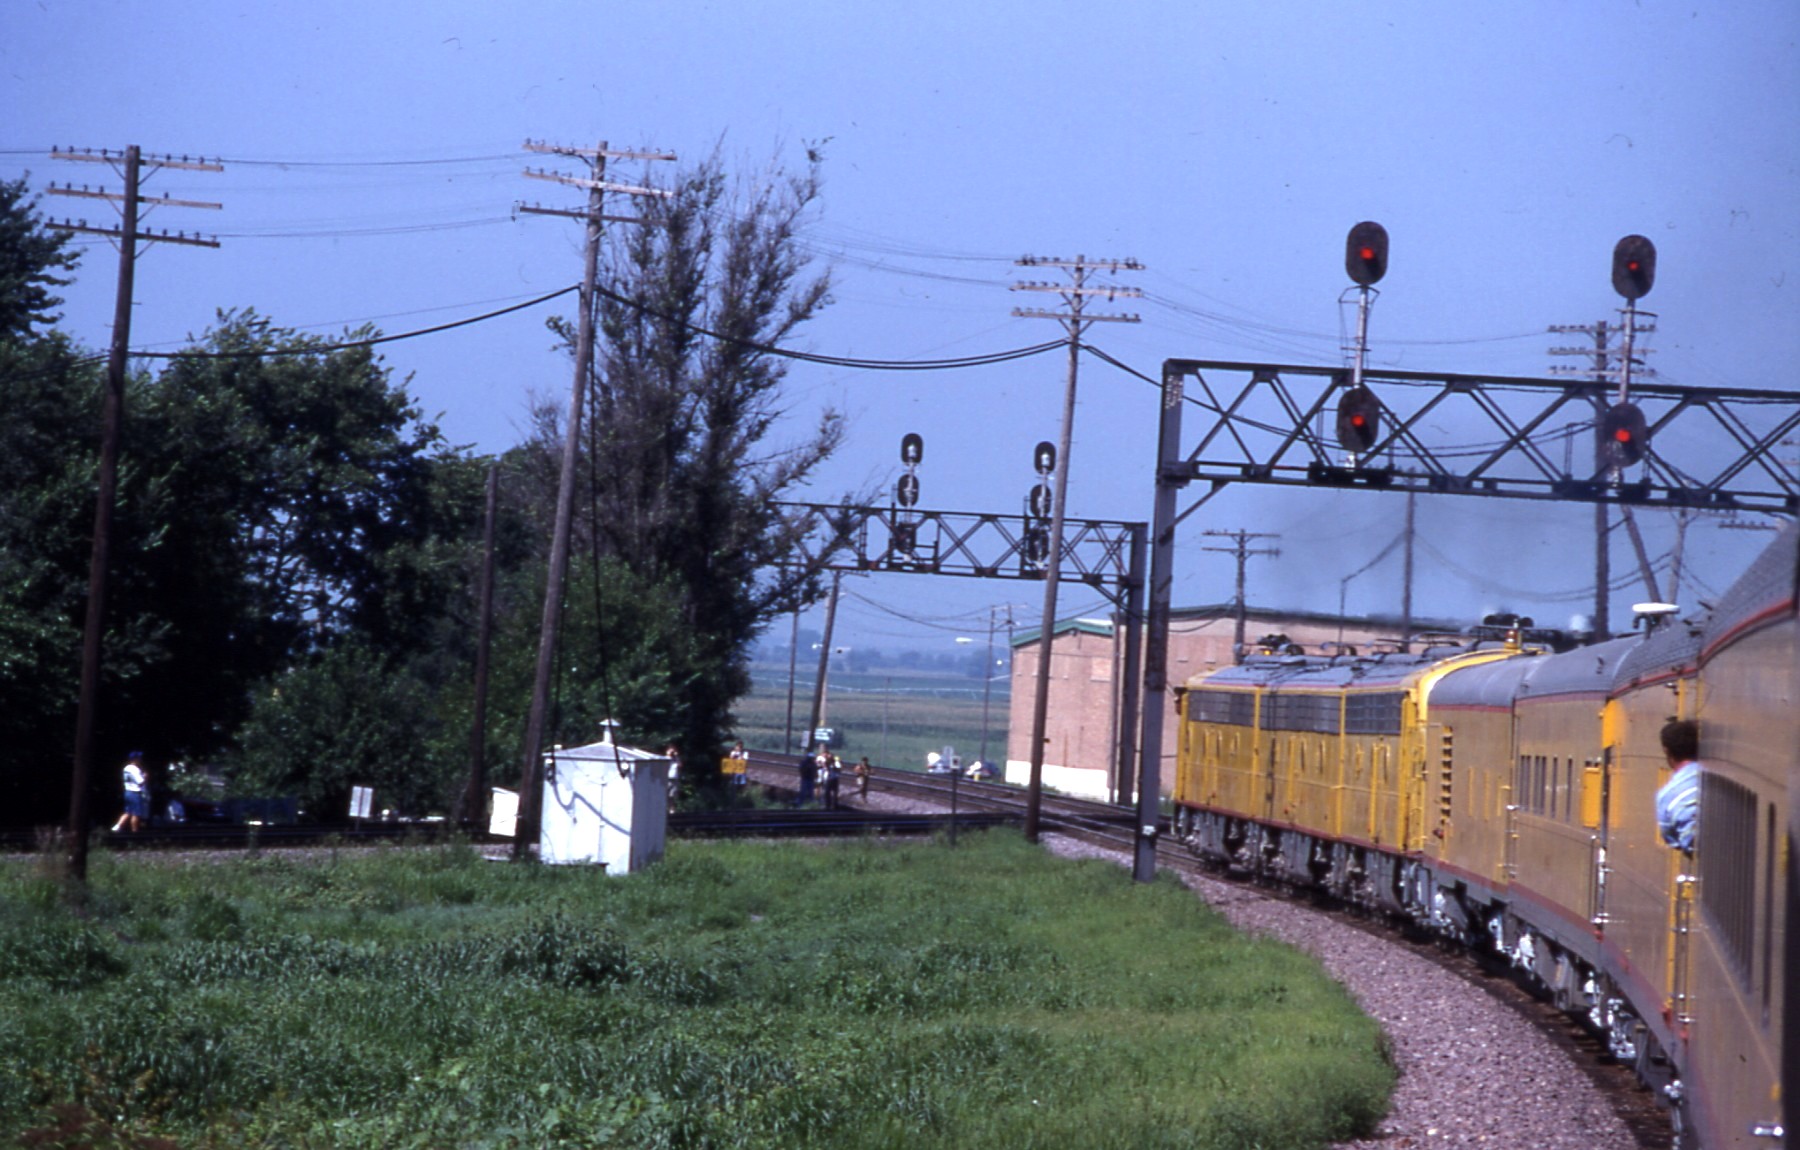 a train moving along the tracks, with power lines and utility poles